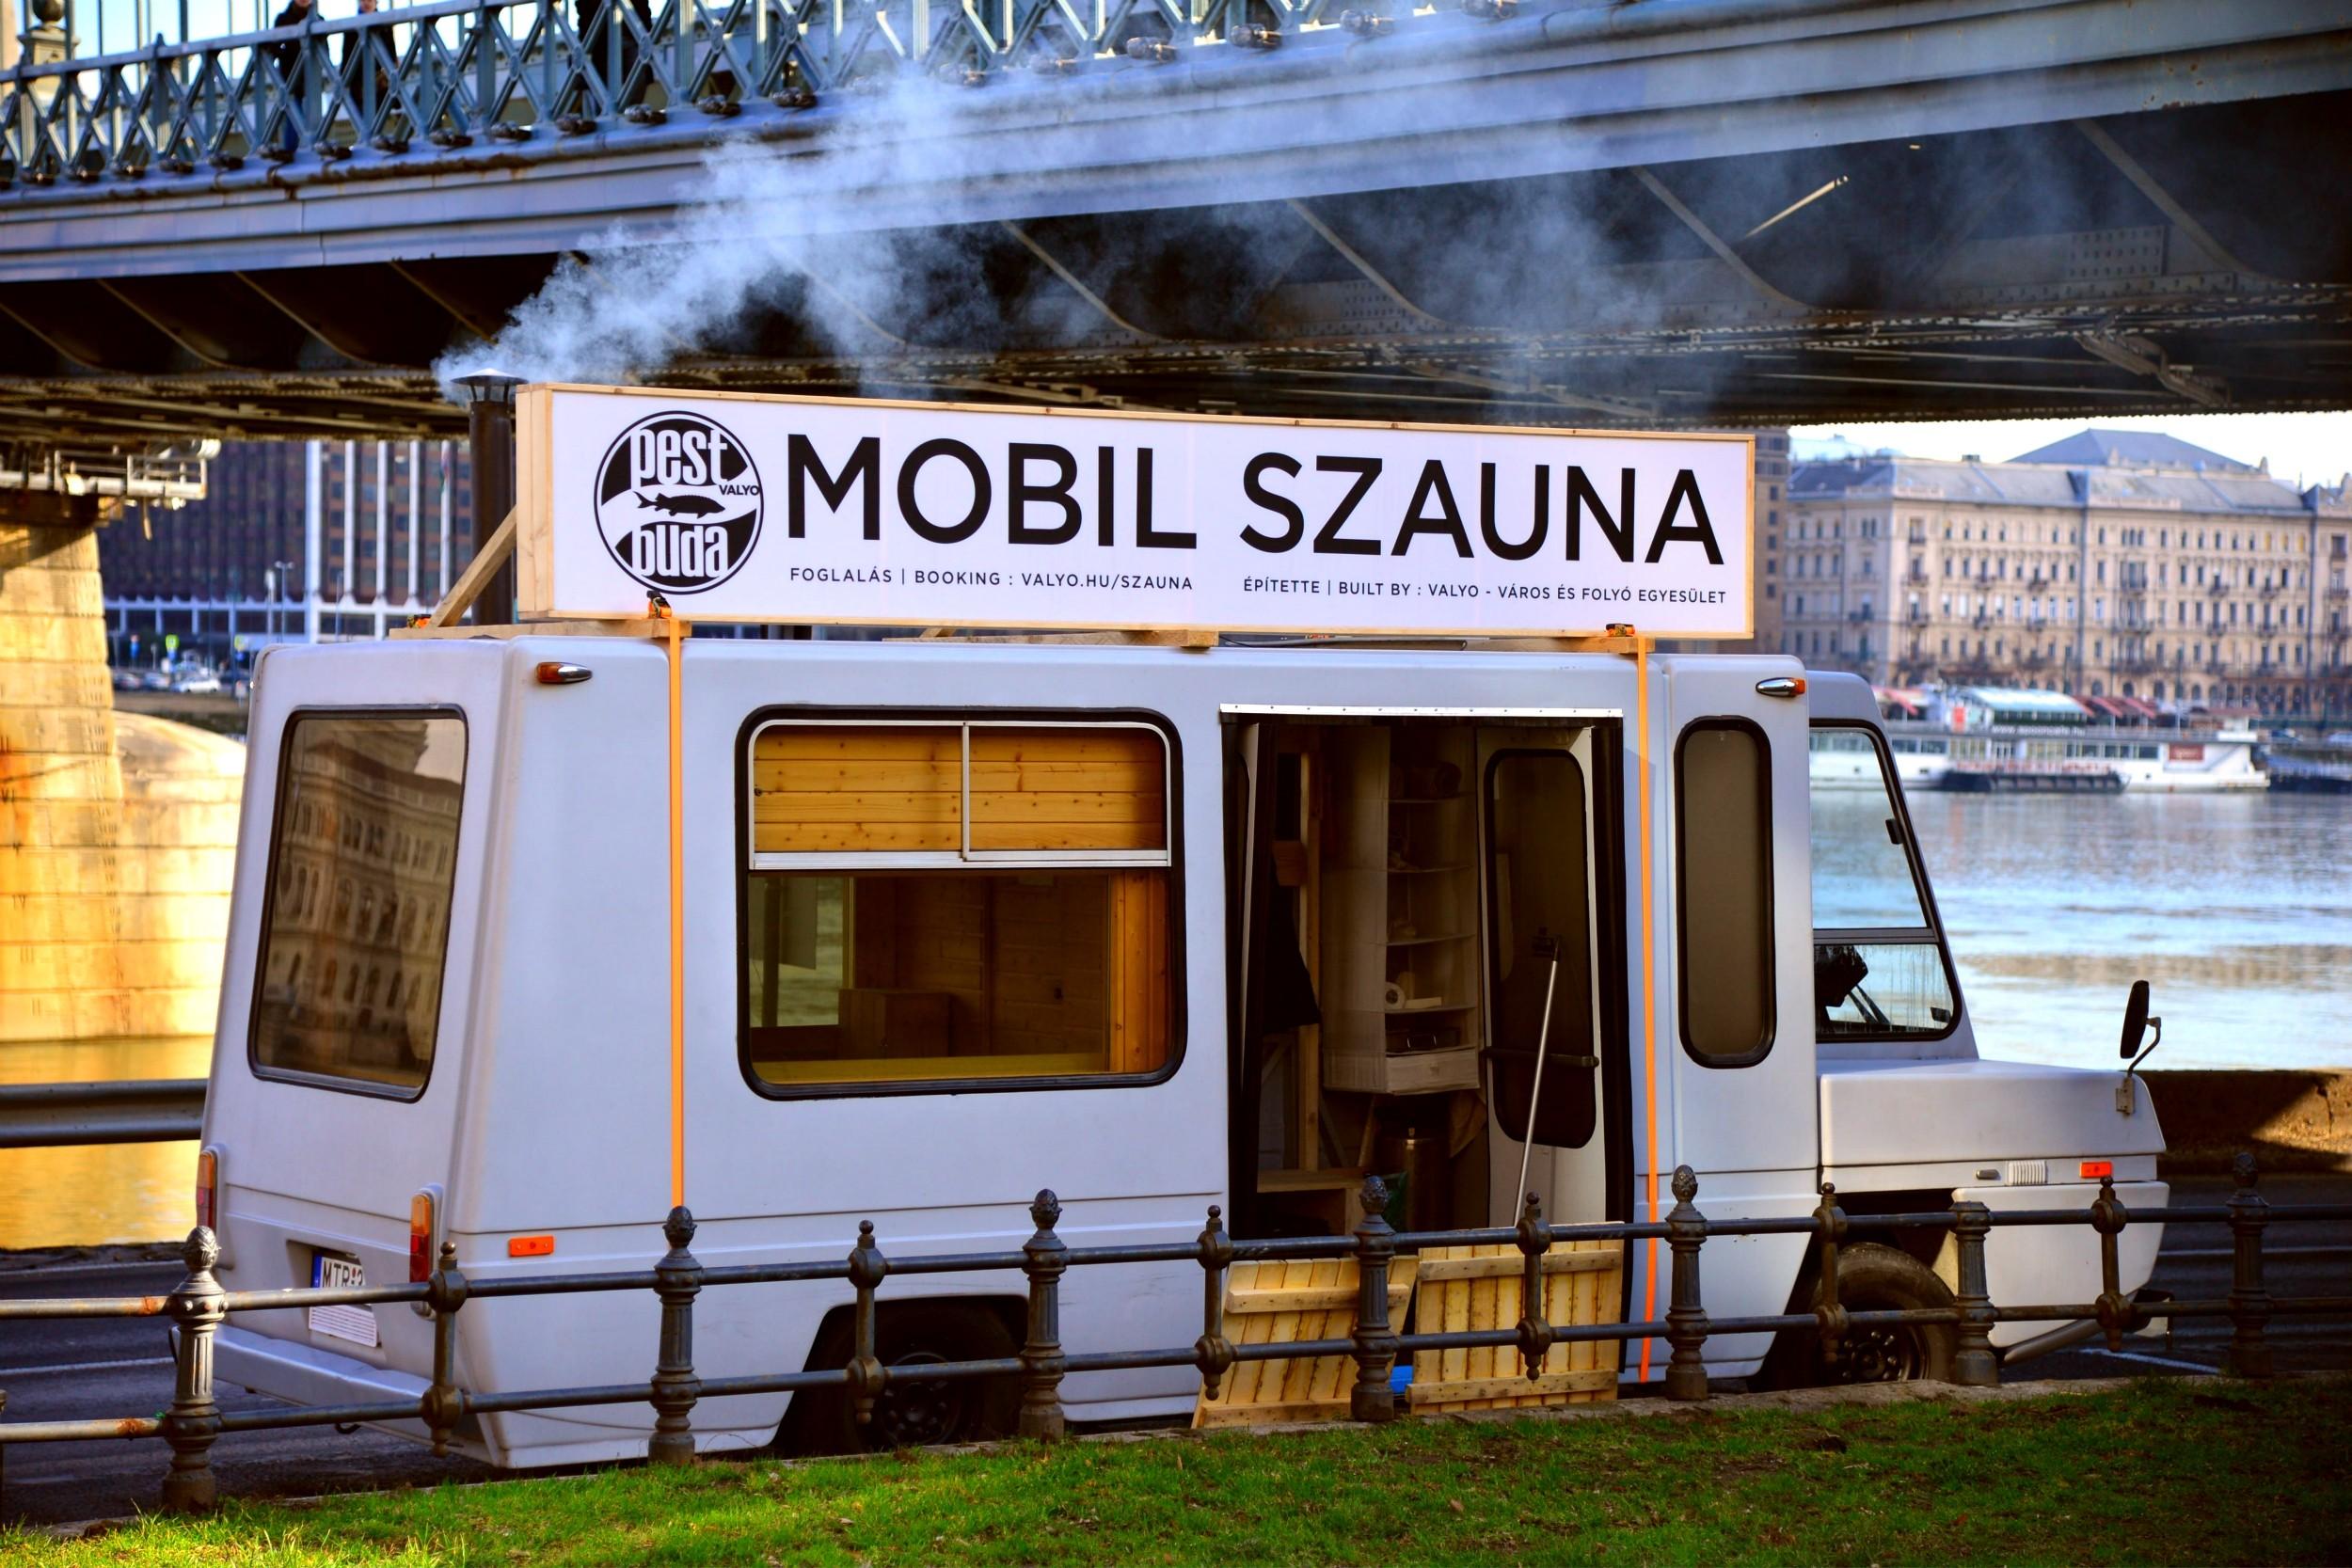 Video Report: Budapest's Mobile Sauna With A View